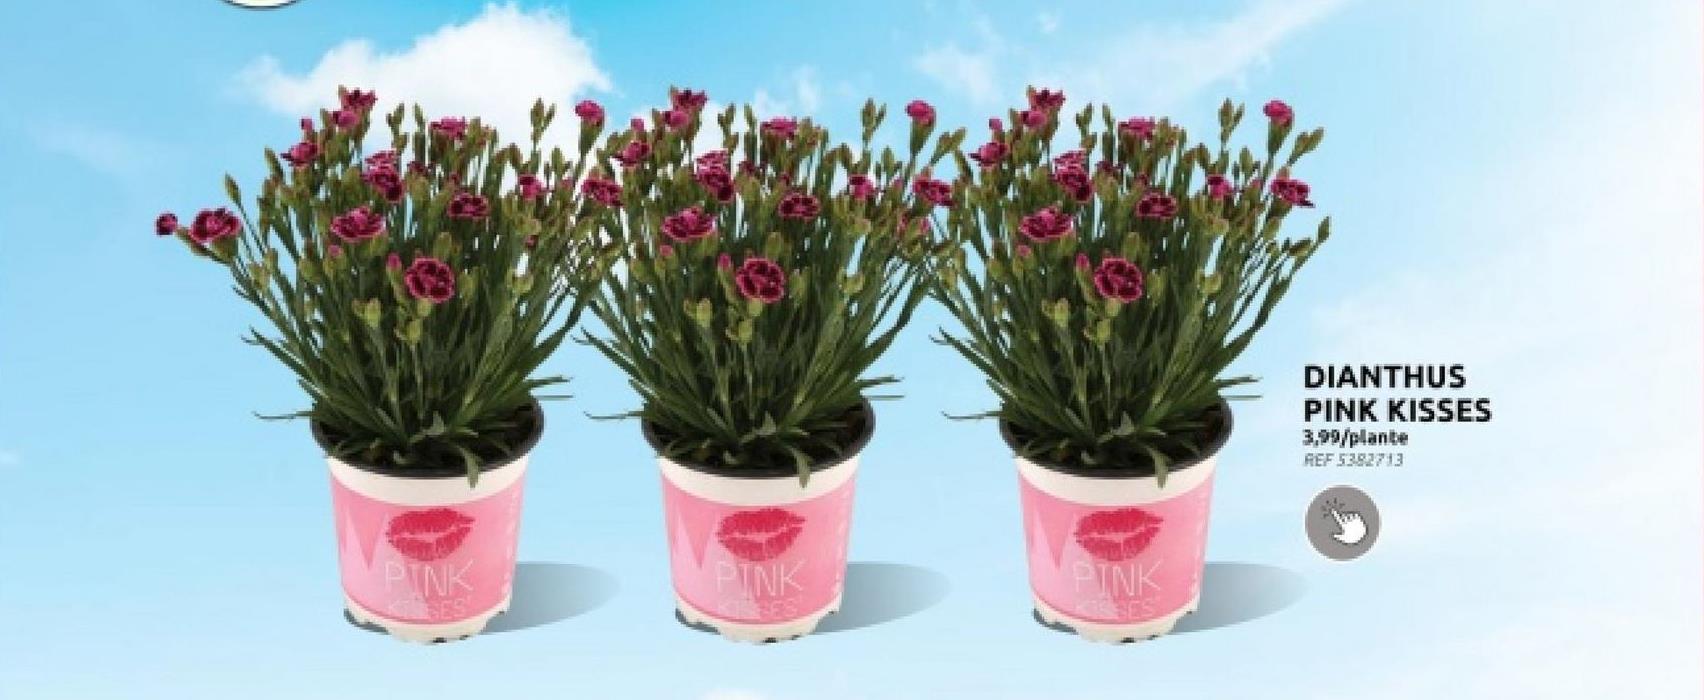 PINK
HES
PINK
PINK
CSES
DIANTHUS
PINK KISSES
3,99/plante
REF 5382713